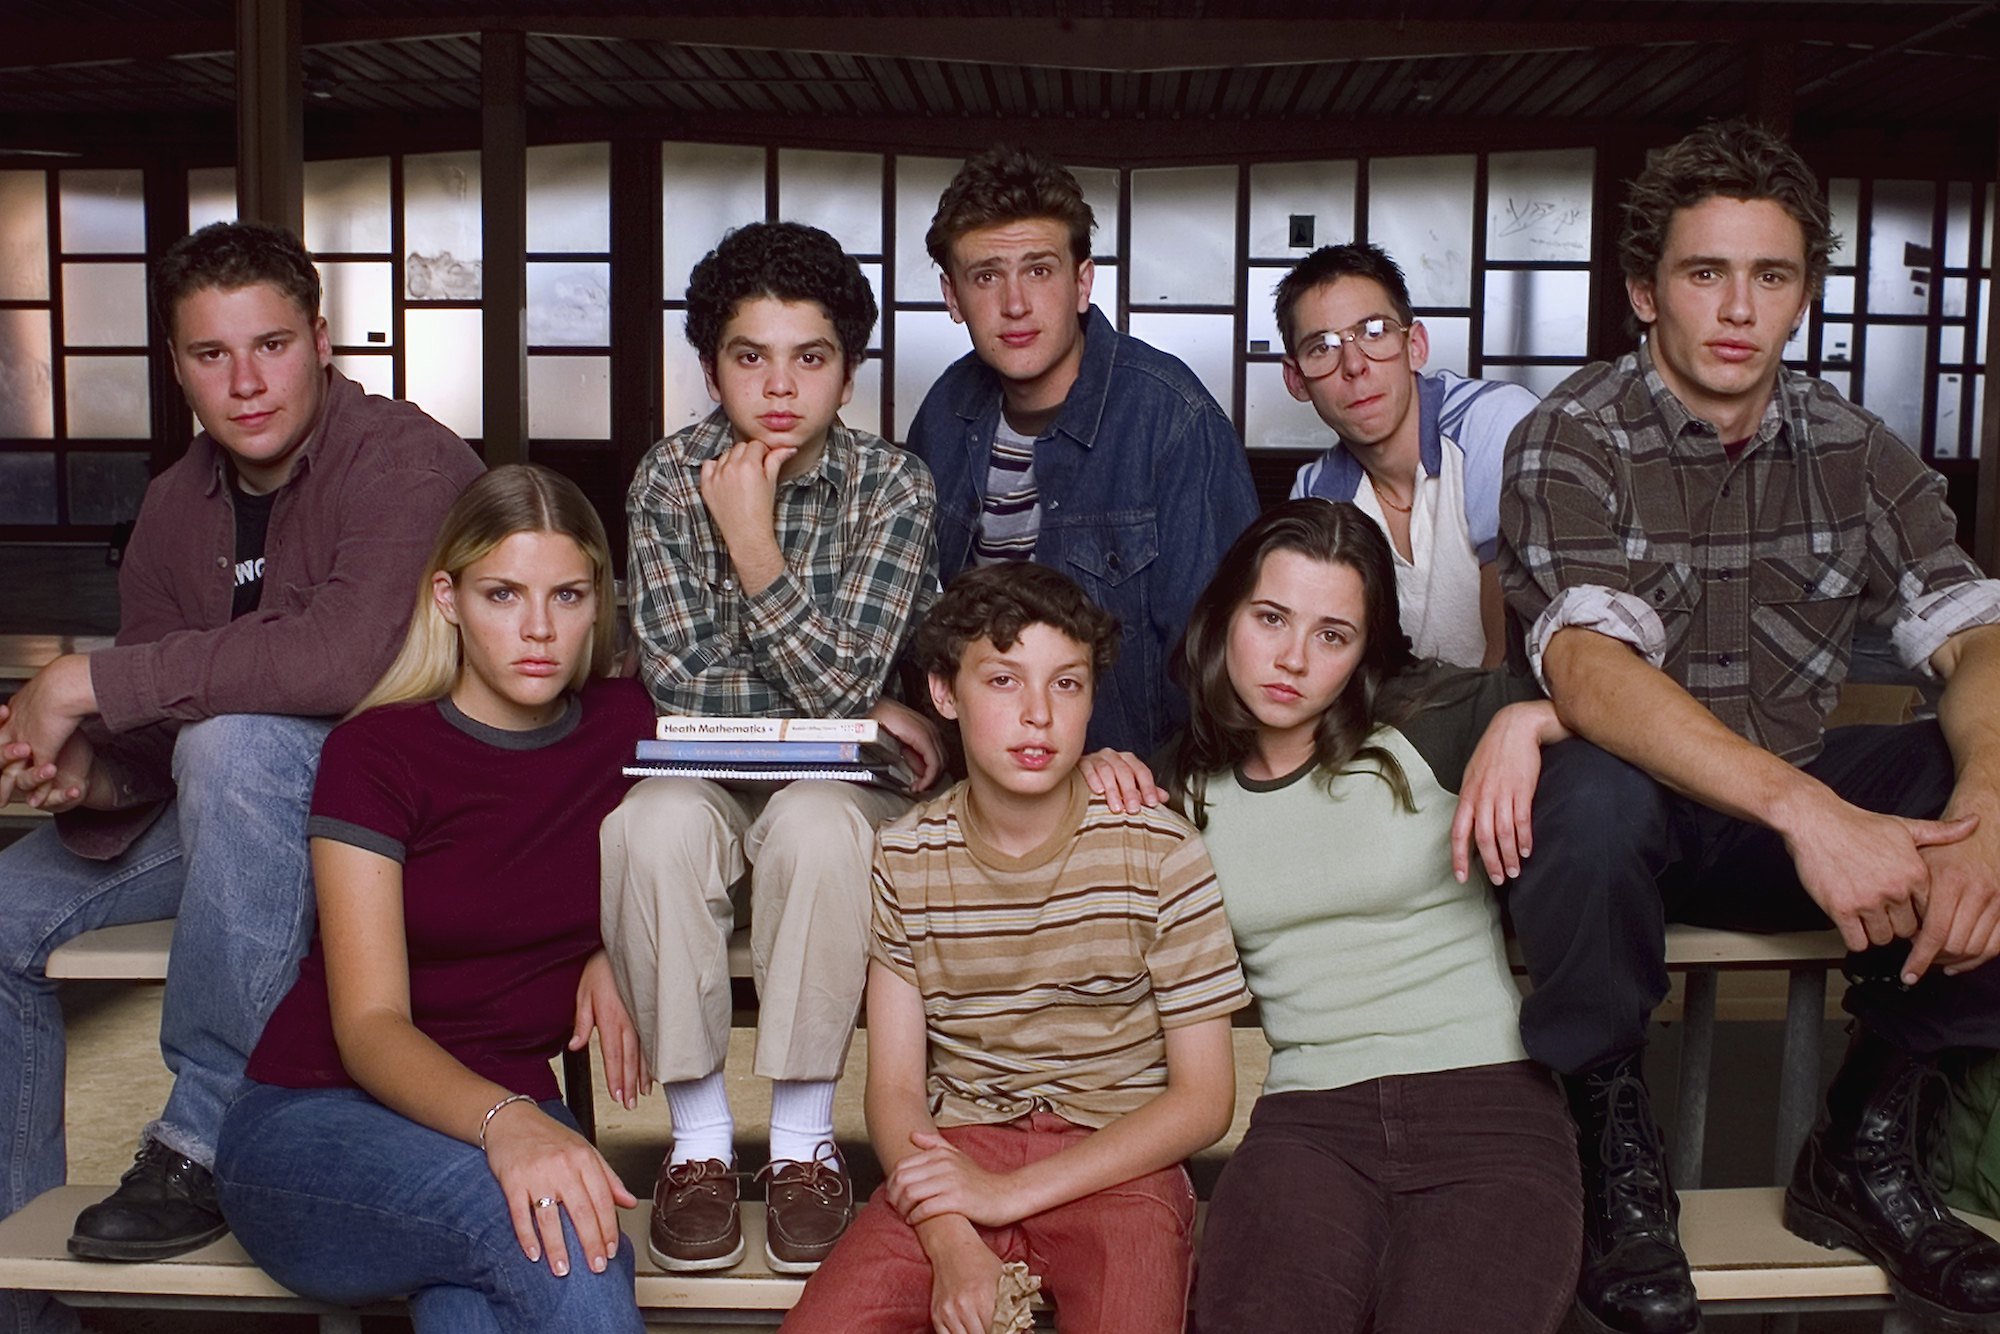 'Freaks and Geeks' cast